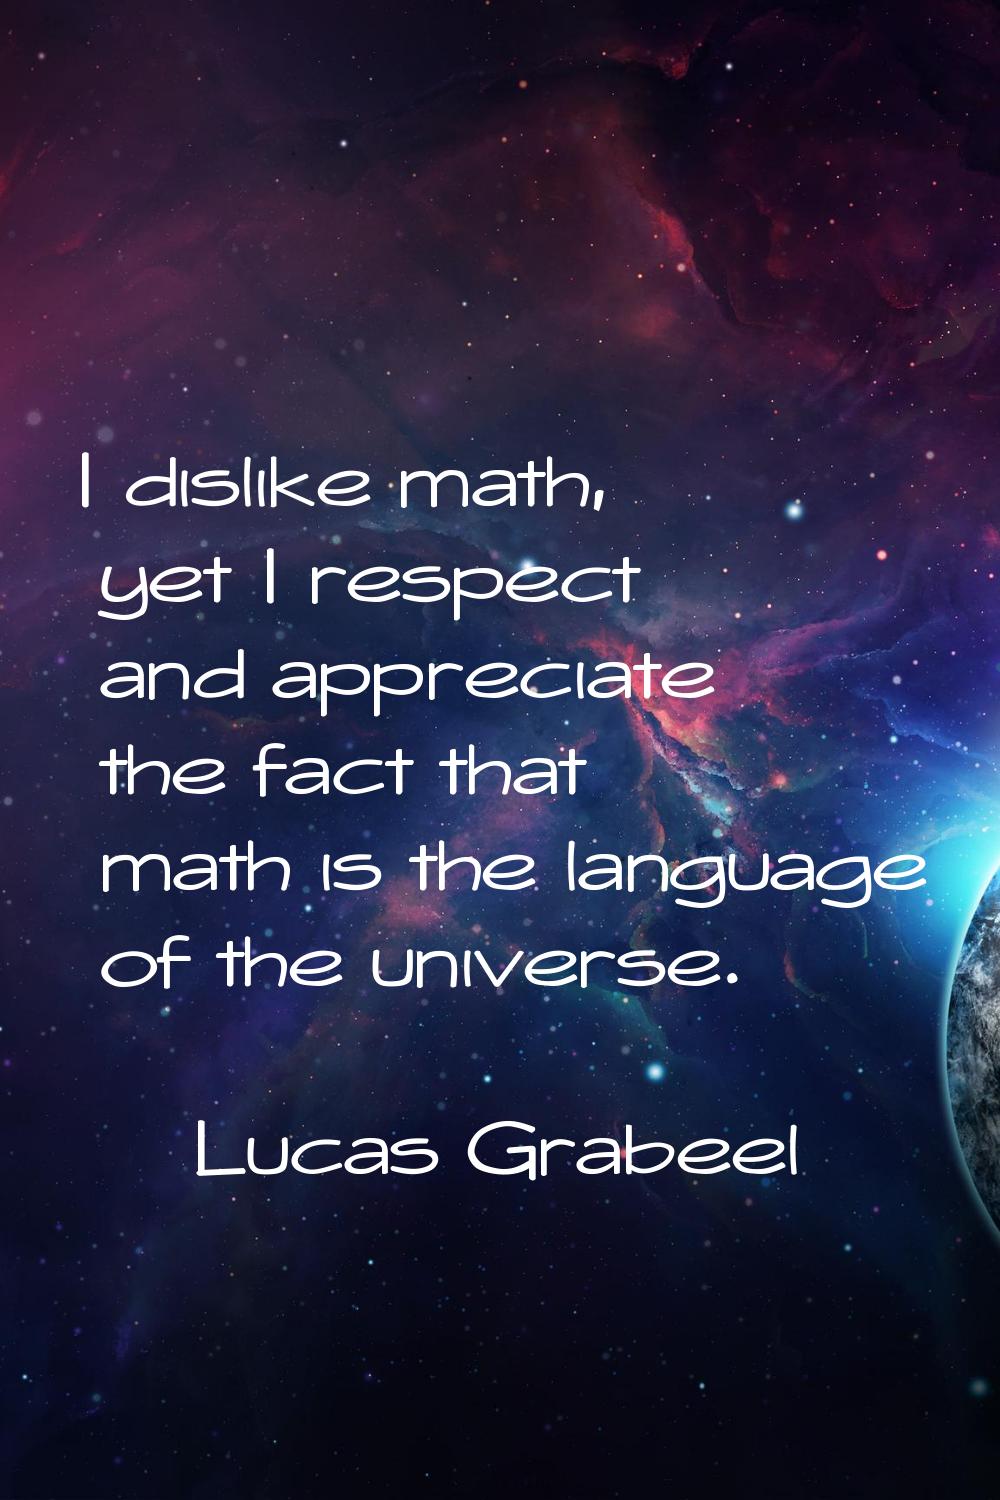 I dislike math, yet I respect and appreciate the fact that math is the language of the universe.